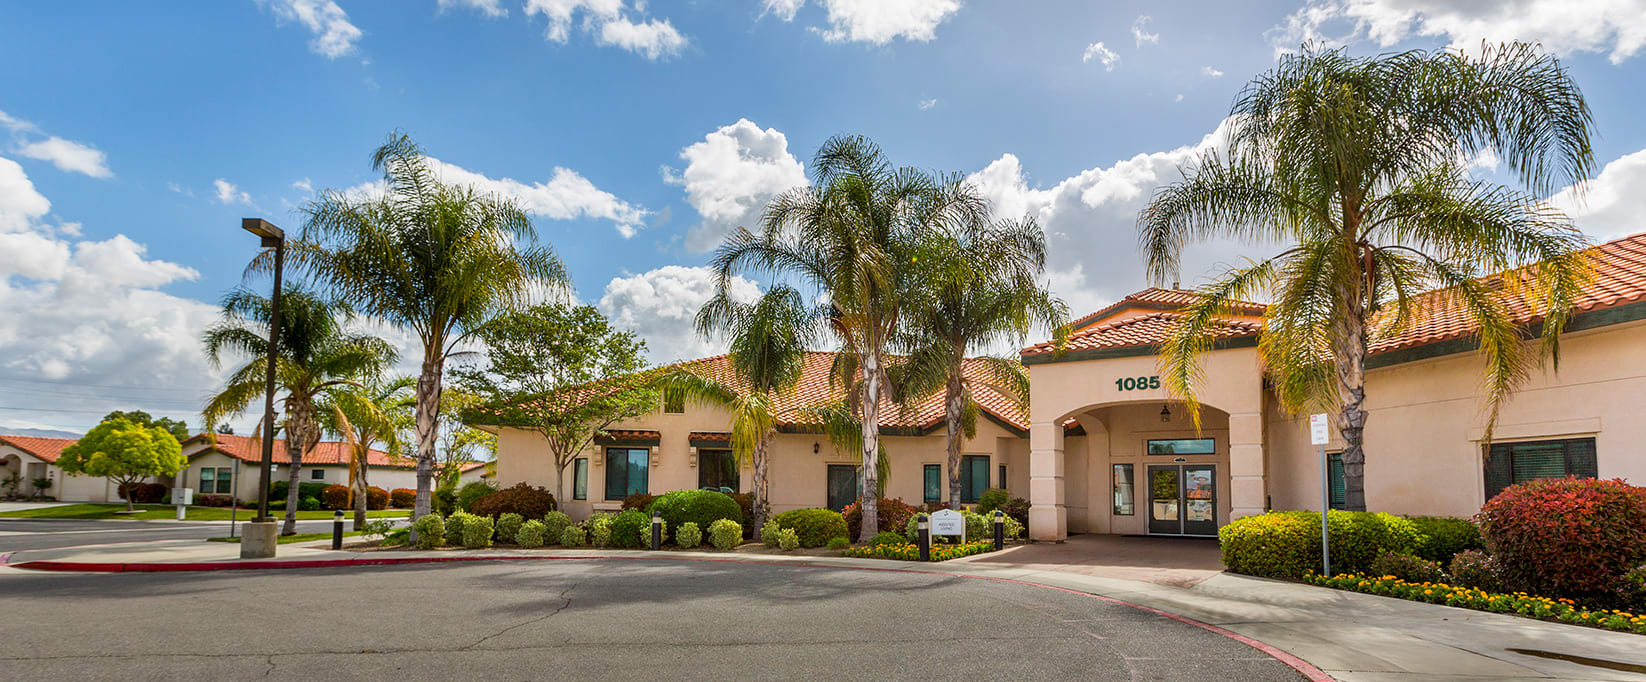 Brookdale Sunwest Assisted Living and Memory Care community exterior